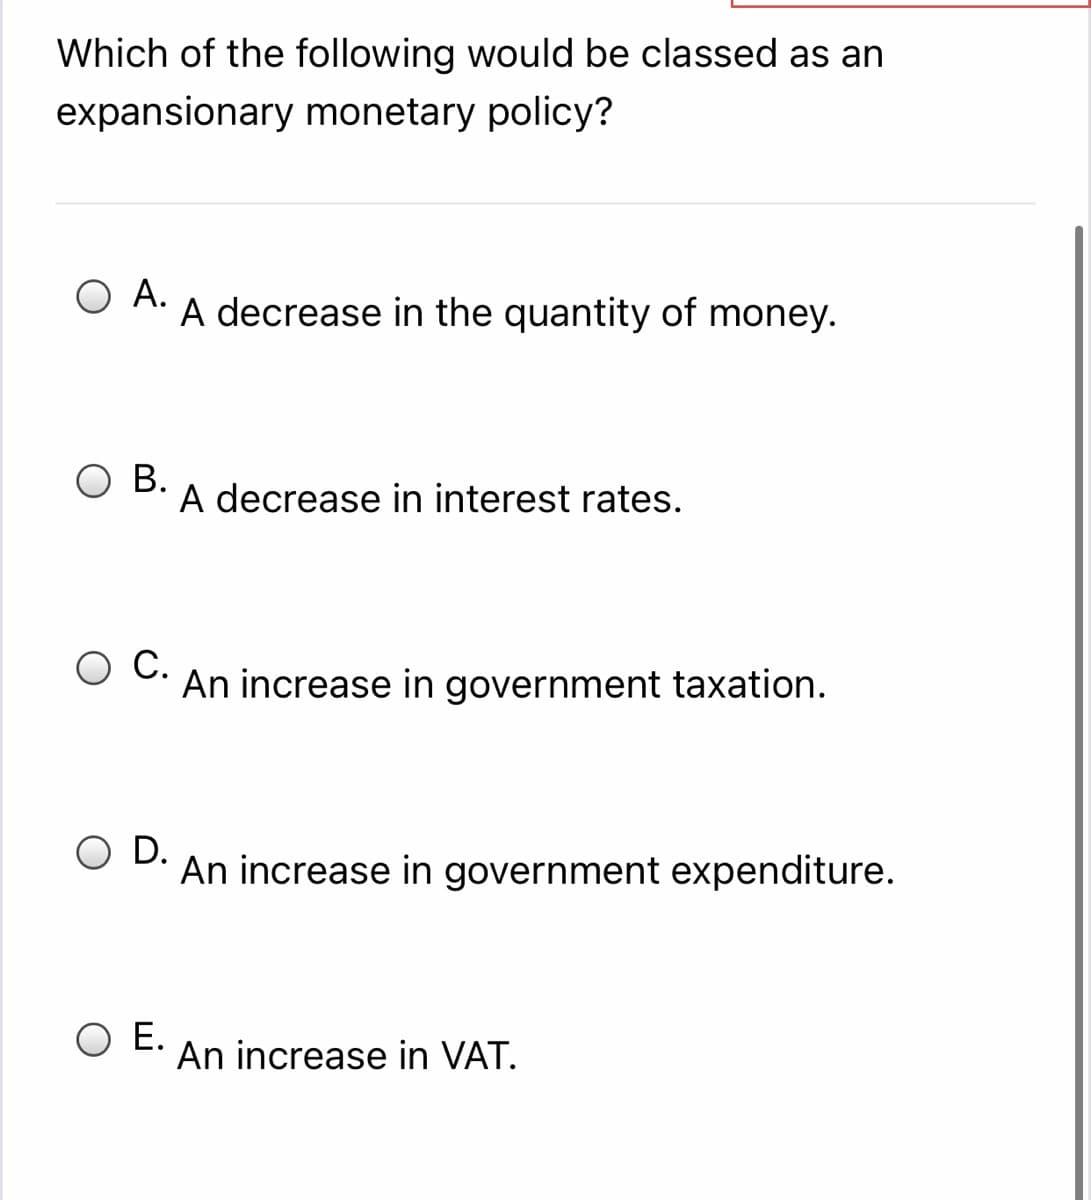 Which of the following would be classed as an
expansionary monetary policy?
Ο Α.
A decrease in the quantity of money.
ОВ.
A decrease in interest rates.
C.
An increase in government taxation.
O D.
An increase in government expenditure.
O E.
An increase in VAT.
